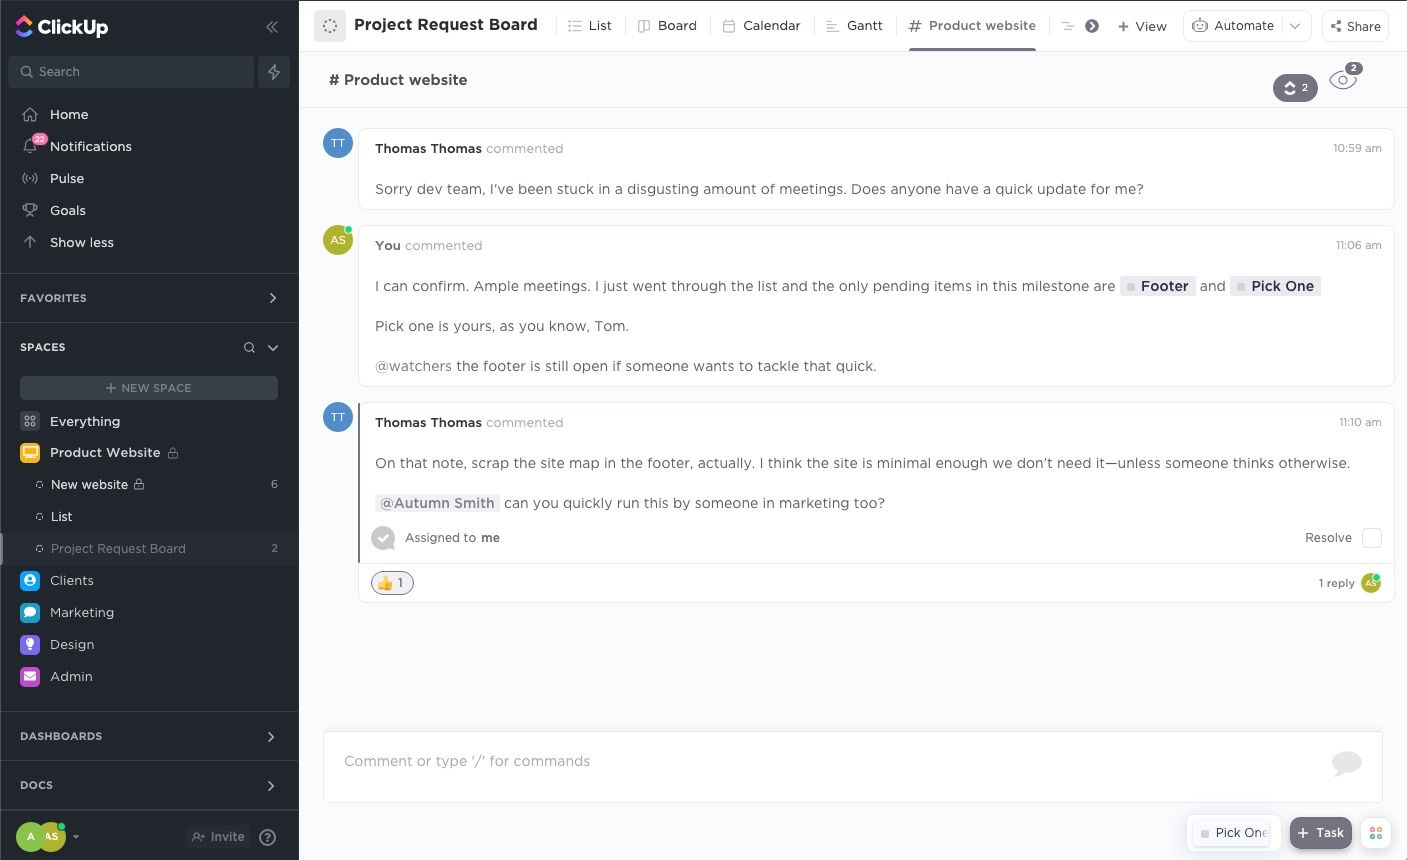 Screenshot of a group chat in project management software